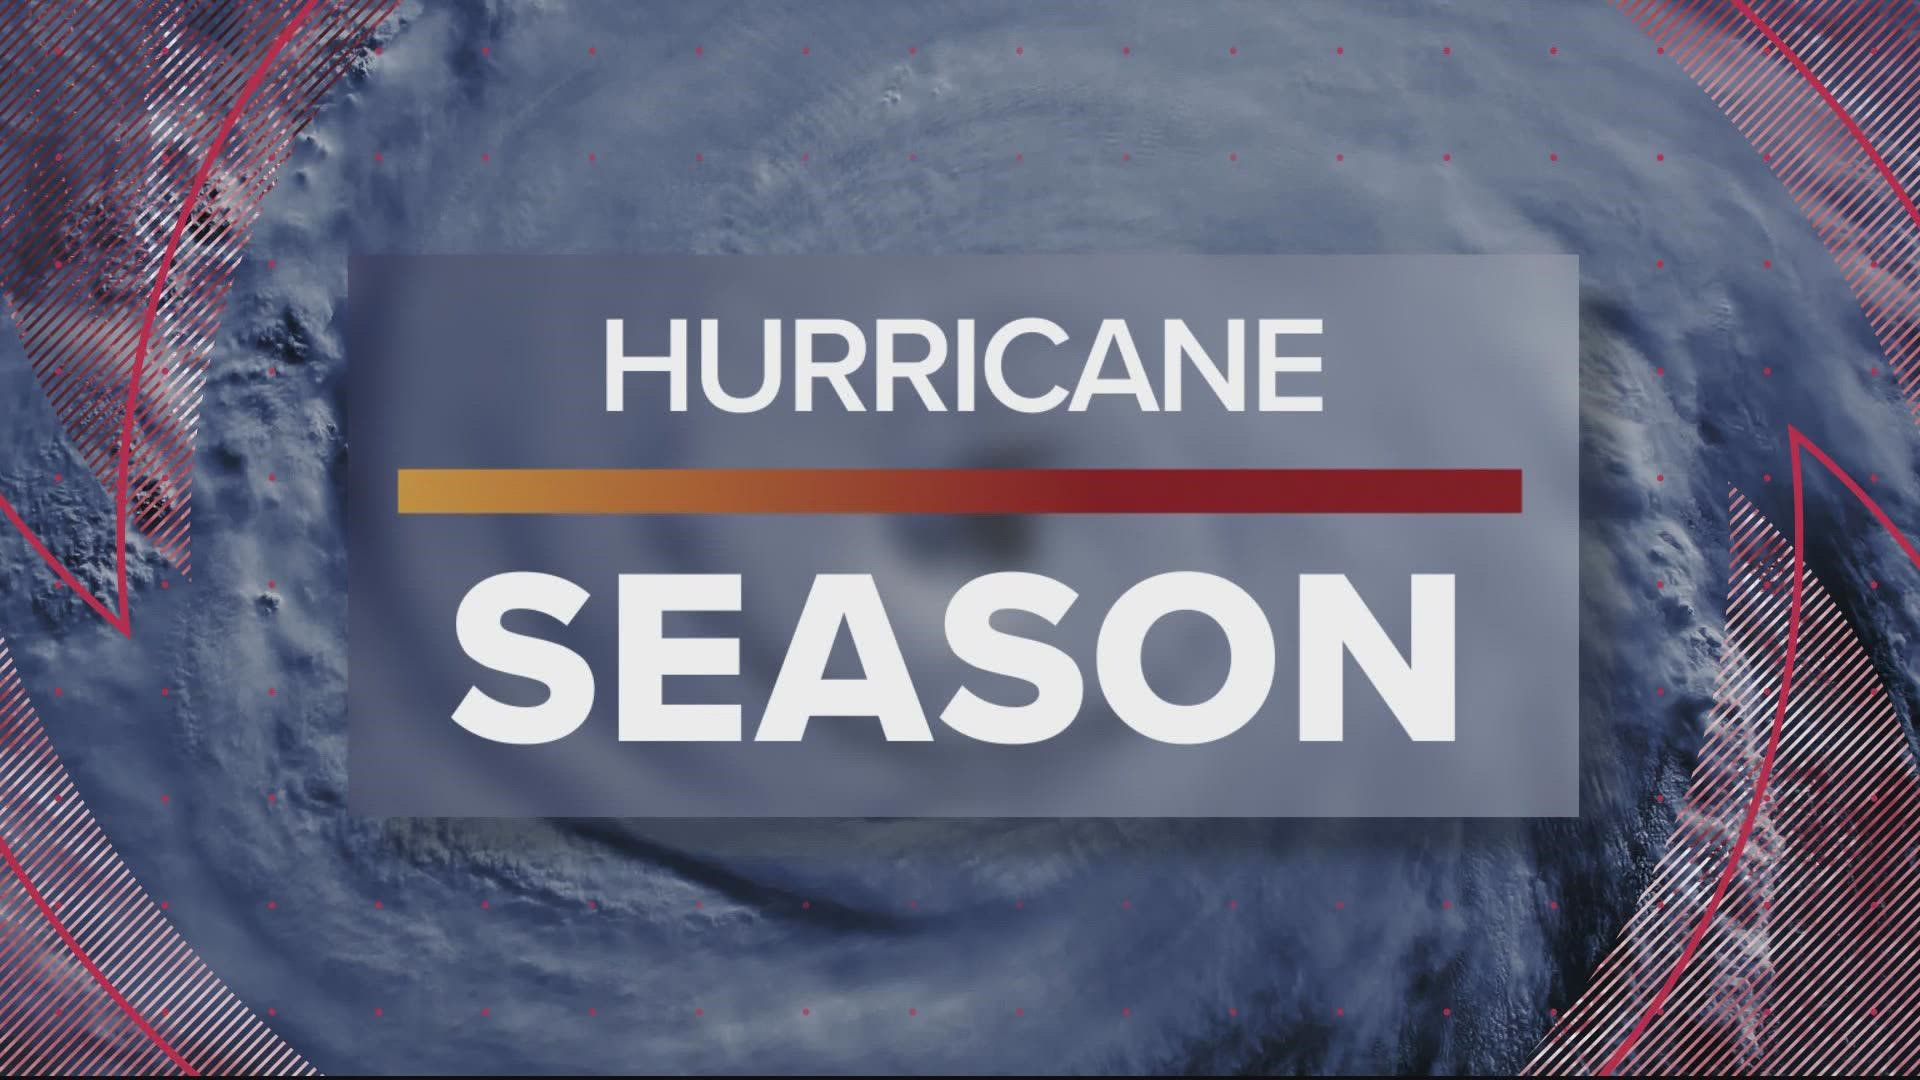 The 2022 NOAA hurricane forecast predicts another busy Atlantic hurricane season. If the outlook holds true it would be the 7th consecutive above-average season.